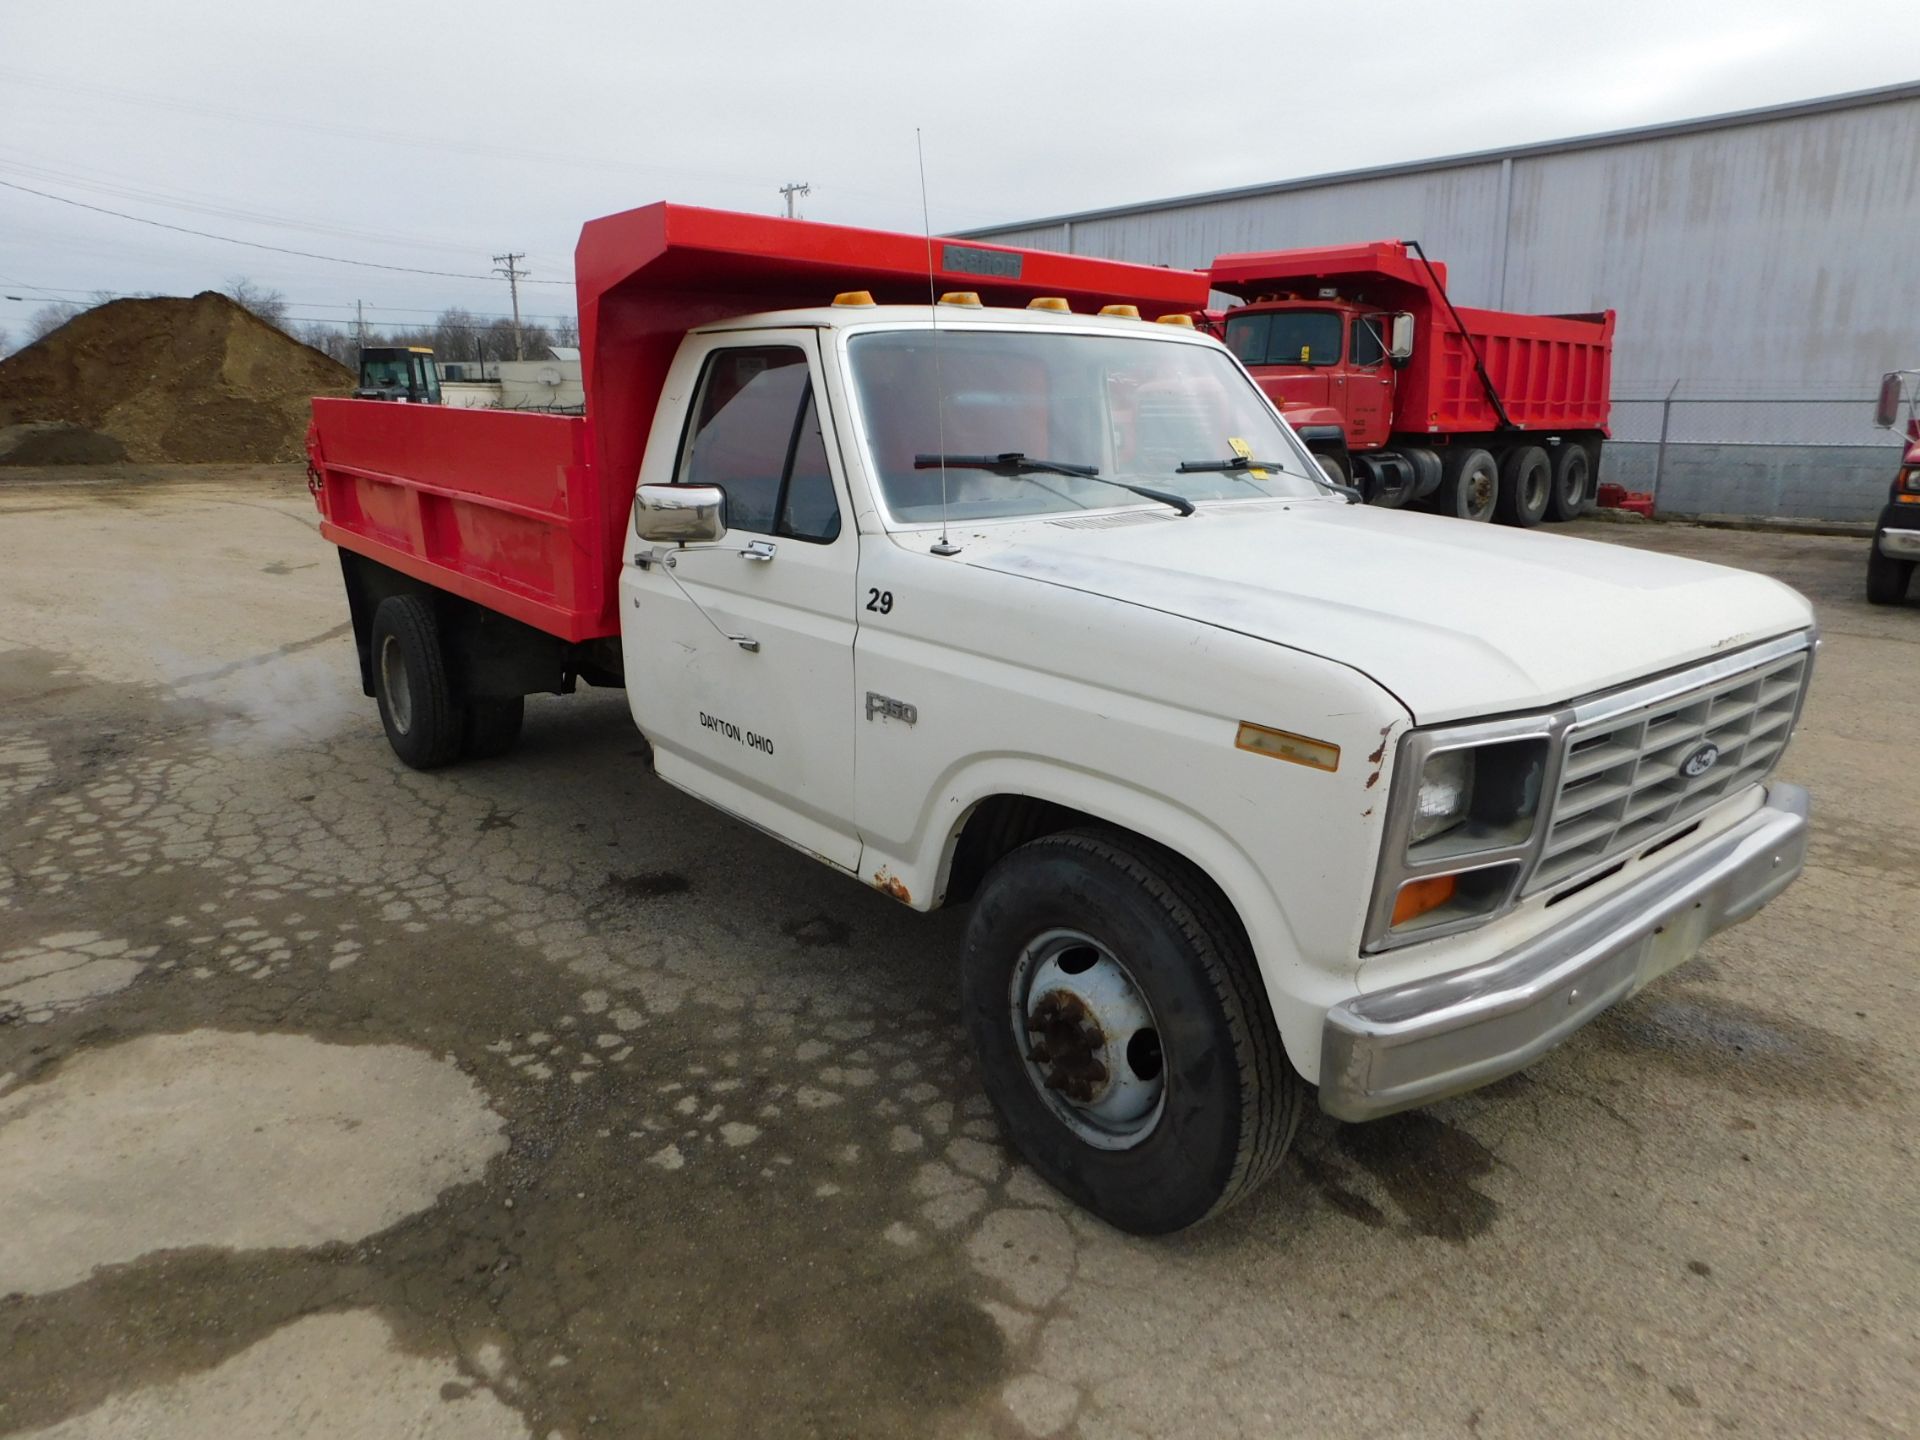 1986 Ford F-350 Single Axle Dump, Gas, 4-Speed Manual Transmission, PTO, 10' Steel Dump Bed, 81, - Image 3 of 18